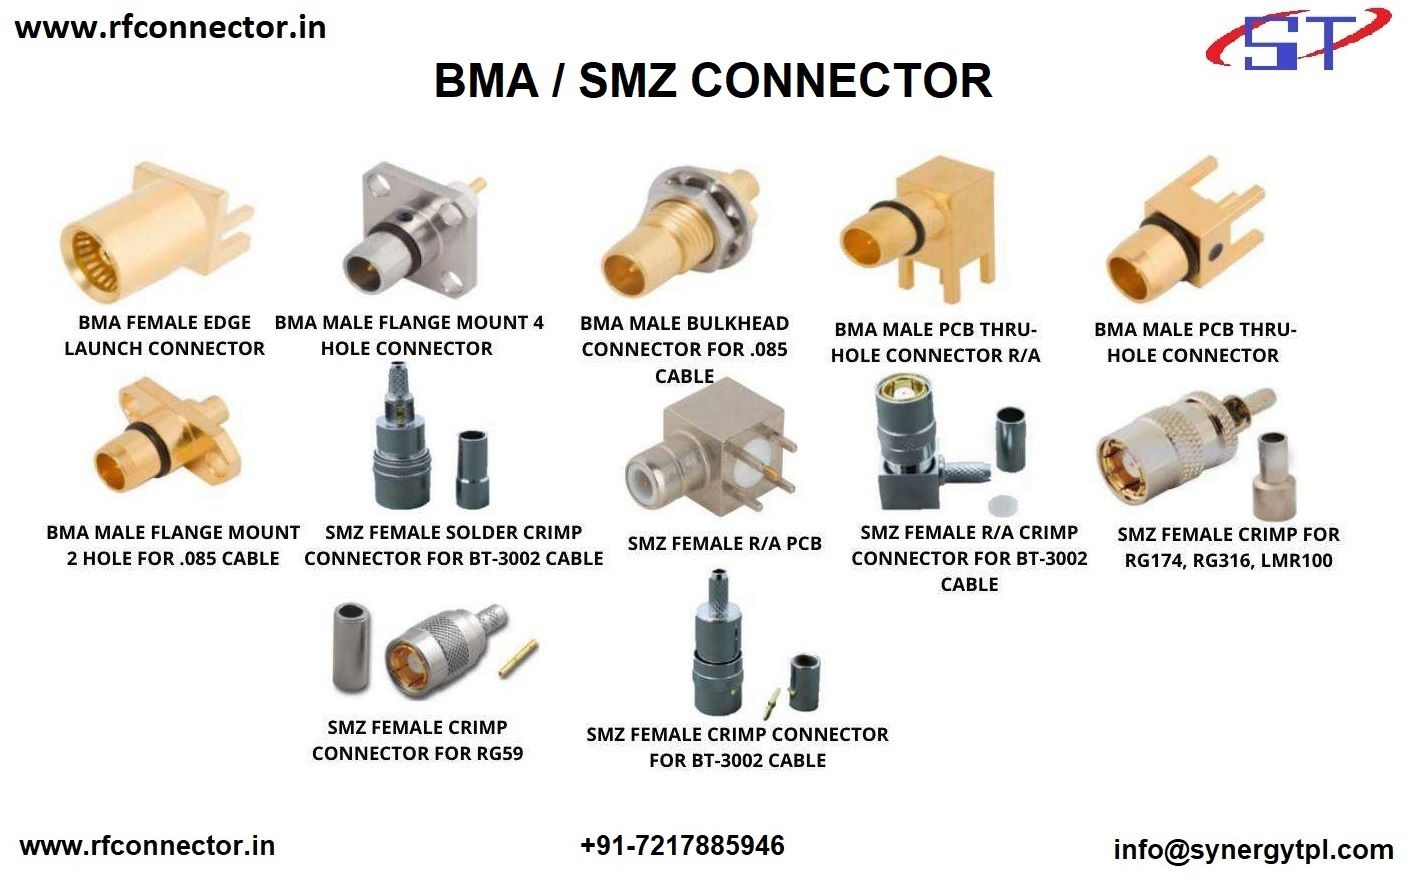 SMB male crimp connector for LMR 100 cable